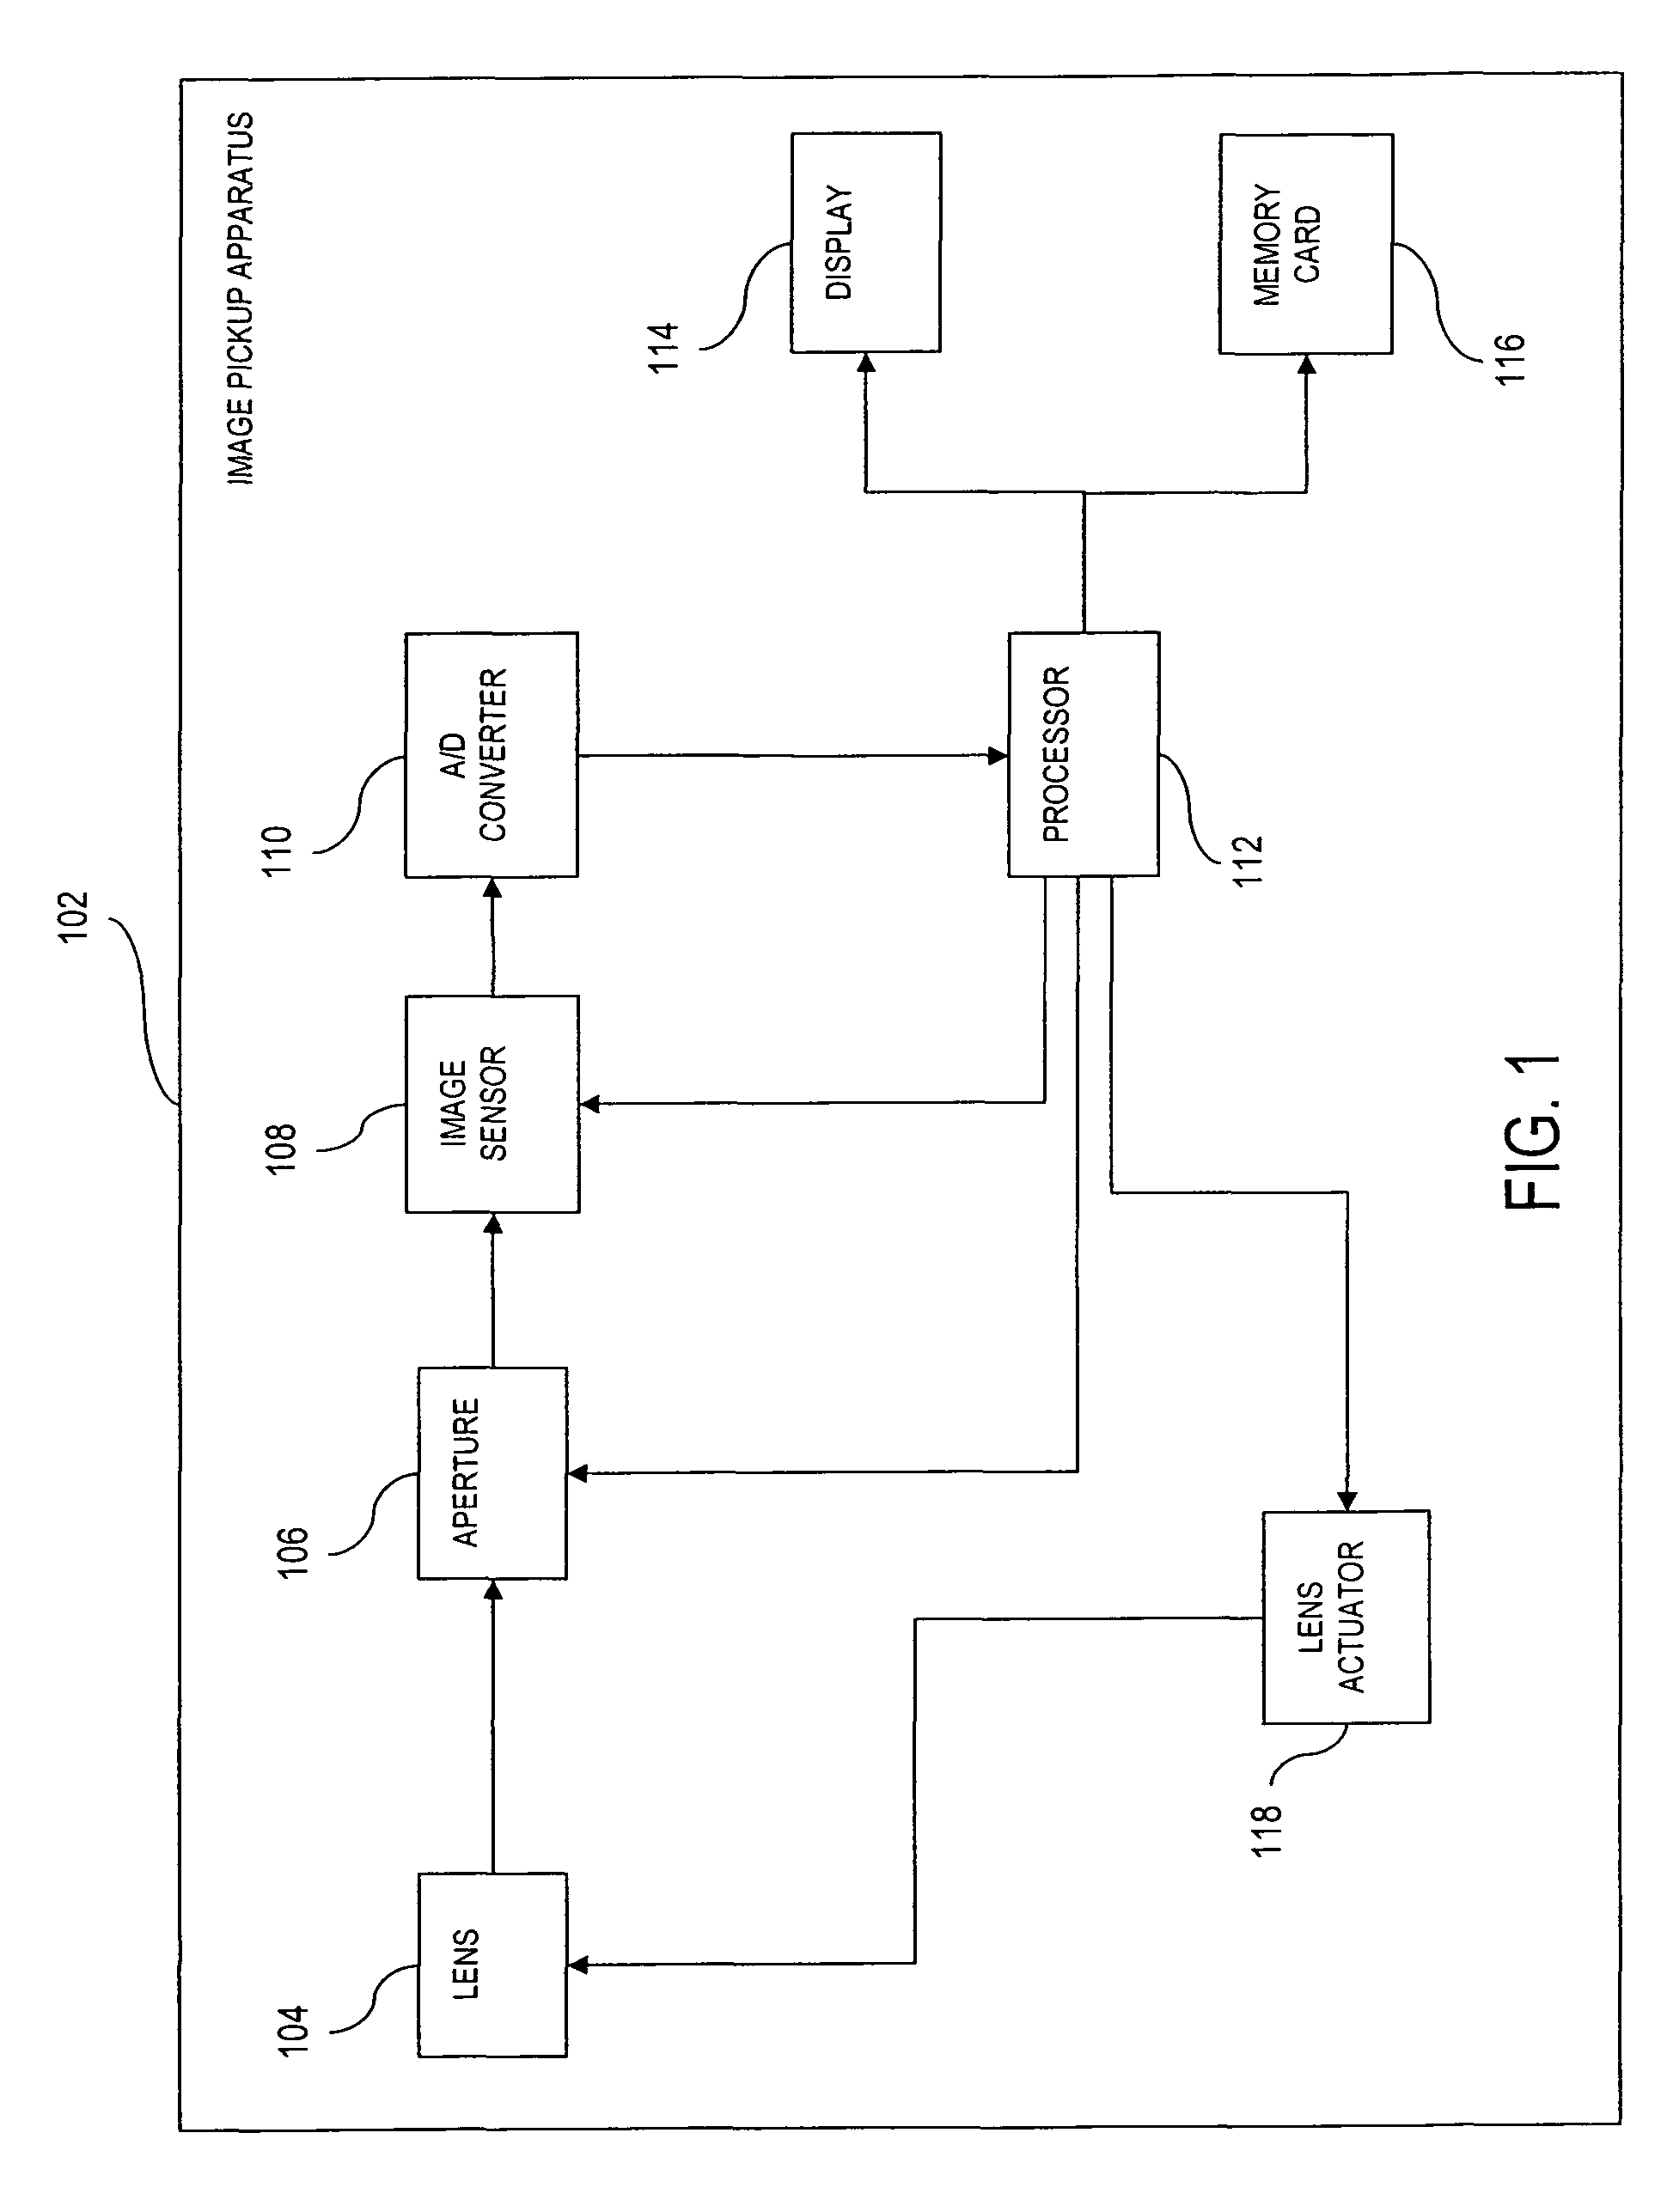 Method and system for generating focus signal